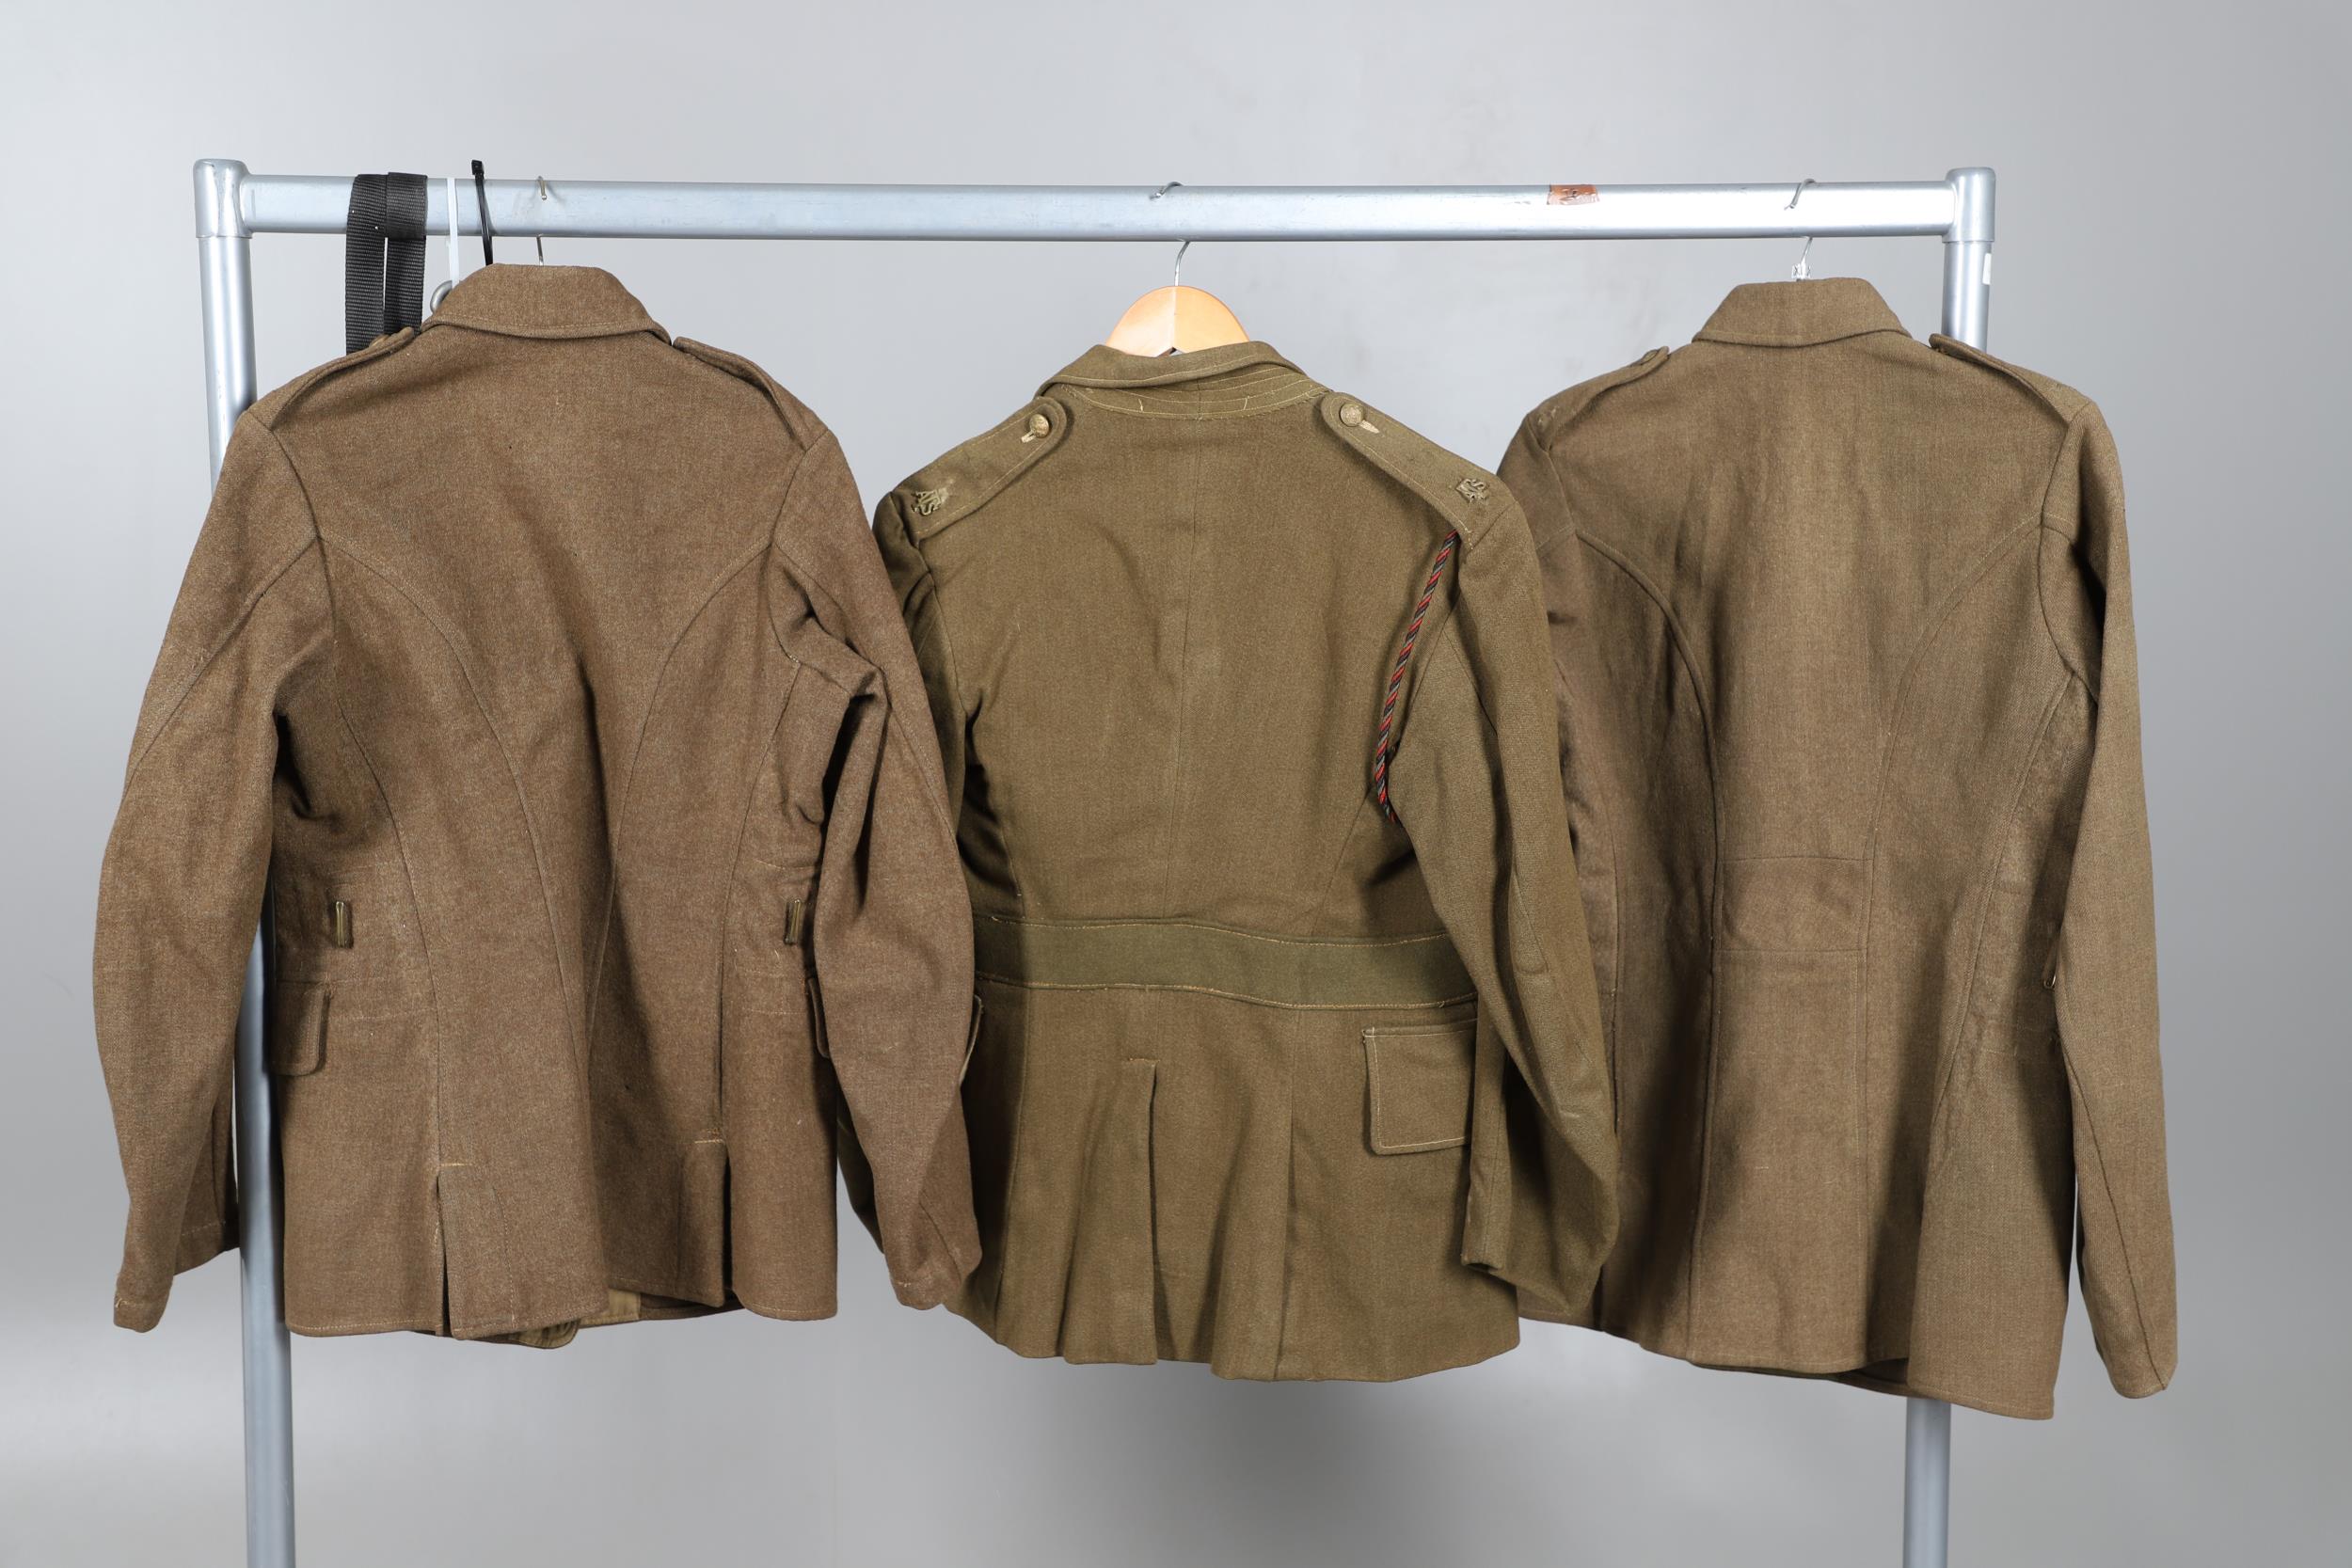 THREE 1922 PATTERN OR SIMILAR JACKETS WITH GENERAL SERVICE BUTTONS. - Image 9 of 12